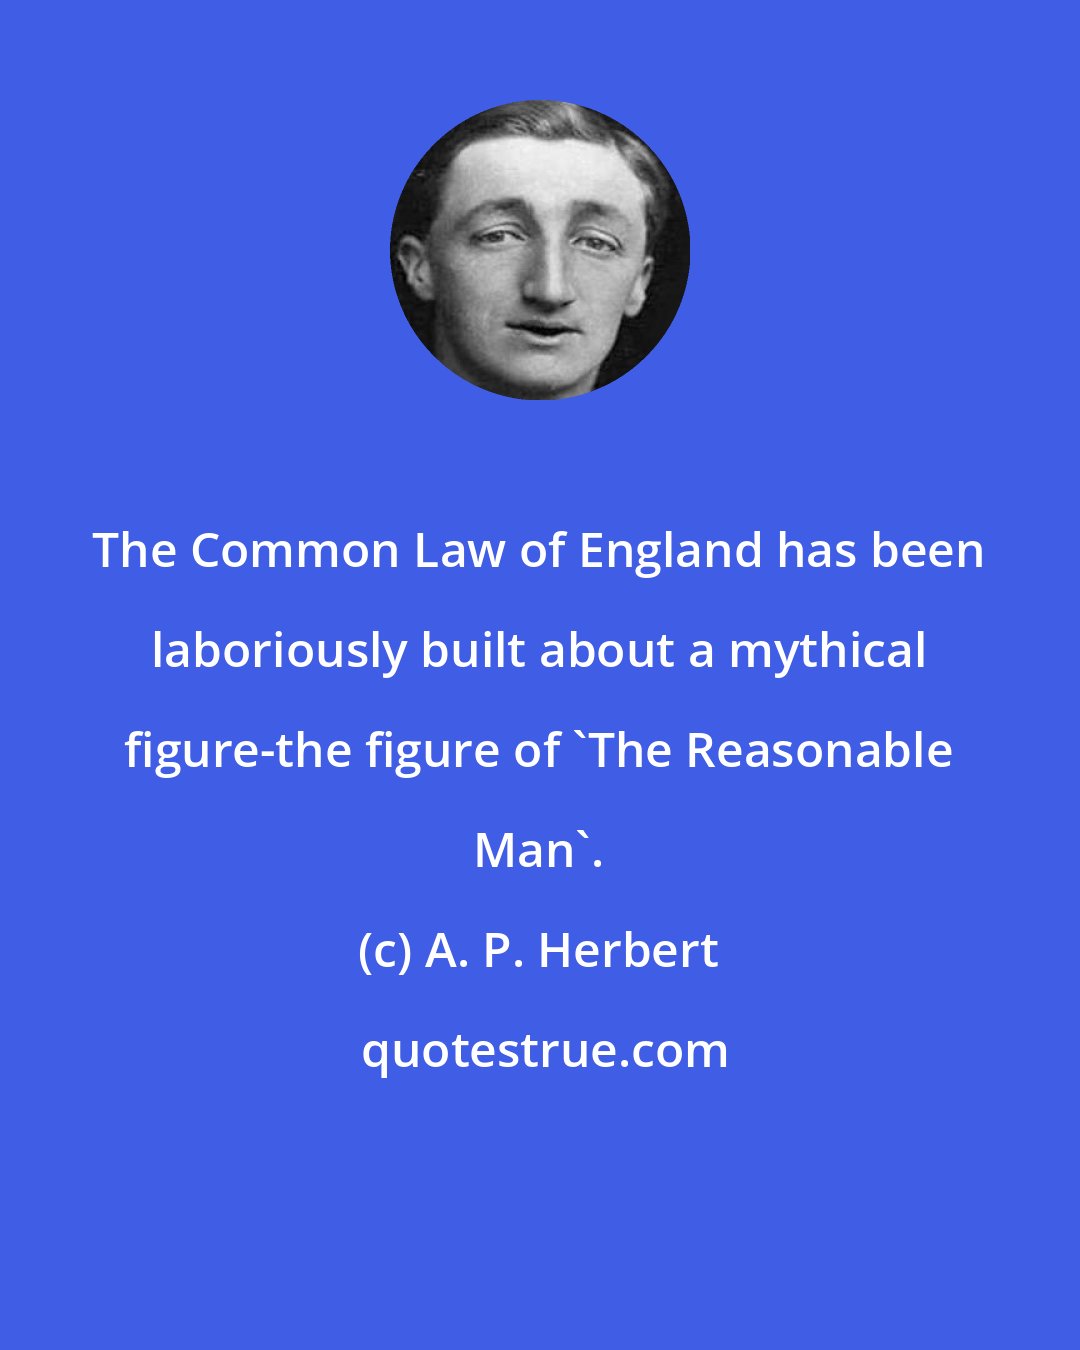 A. P. Herbert: The Common Law of England has been laboriously built about a mythical figure-the figure of 'The Reasonable Man'.